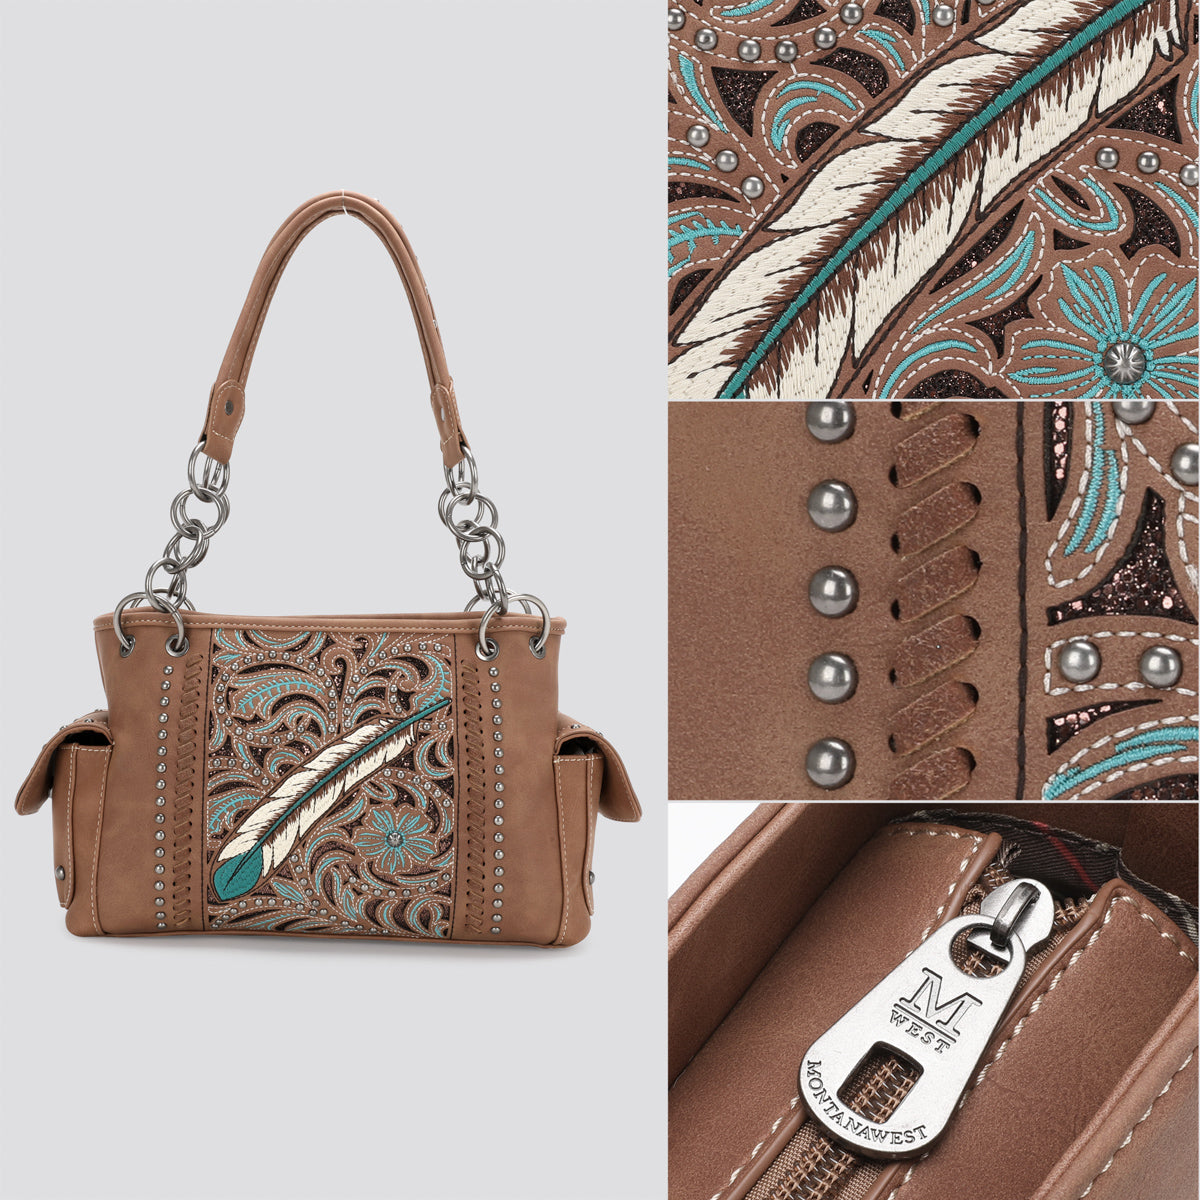 Montana West Tooled Feather Satchel